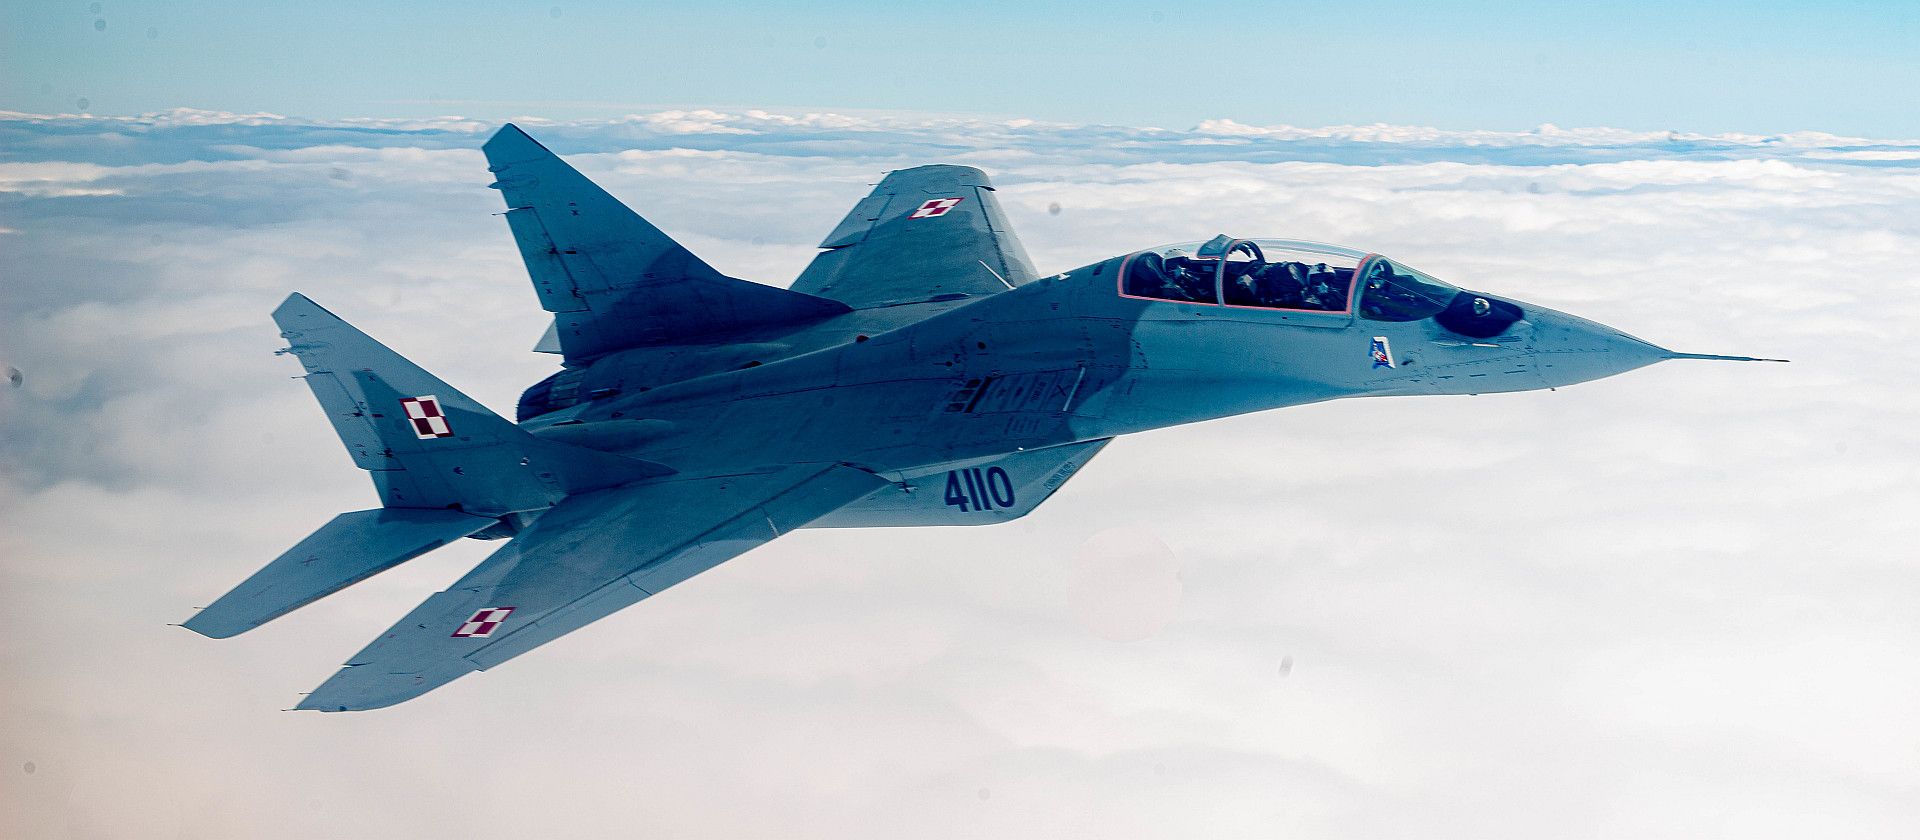 29 Jet Fighter Aircraft Assigned To The Polish Air Force S 1st Tactical Air Wing